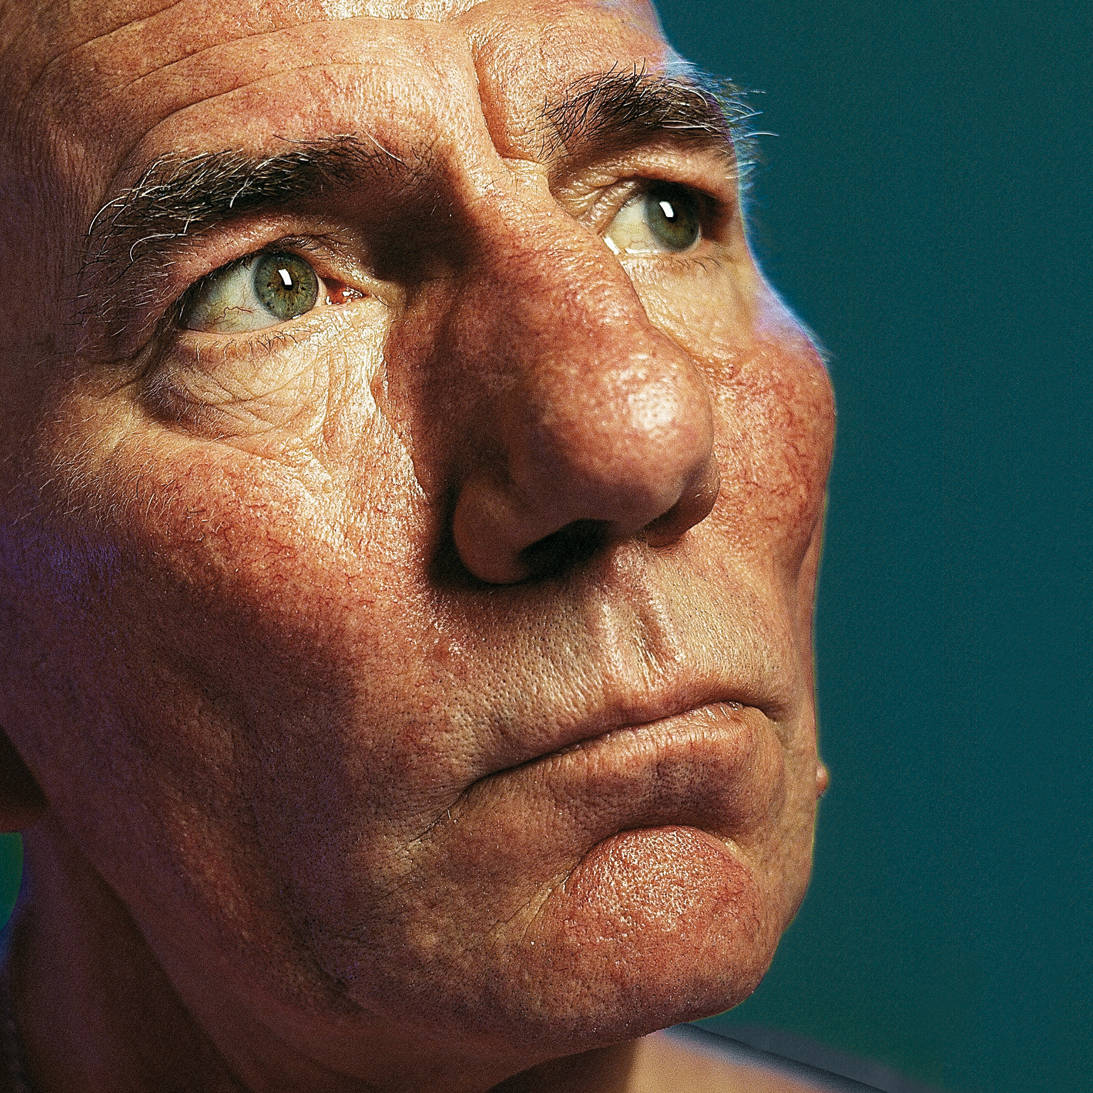 Pete Postlethwaite Looking Up With Green Eyes Wallpaper